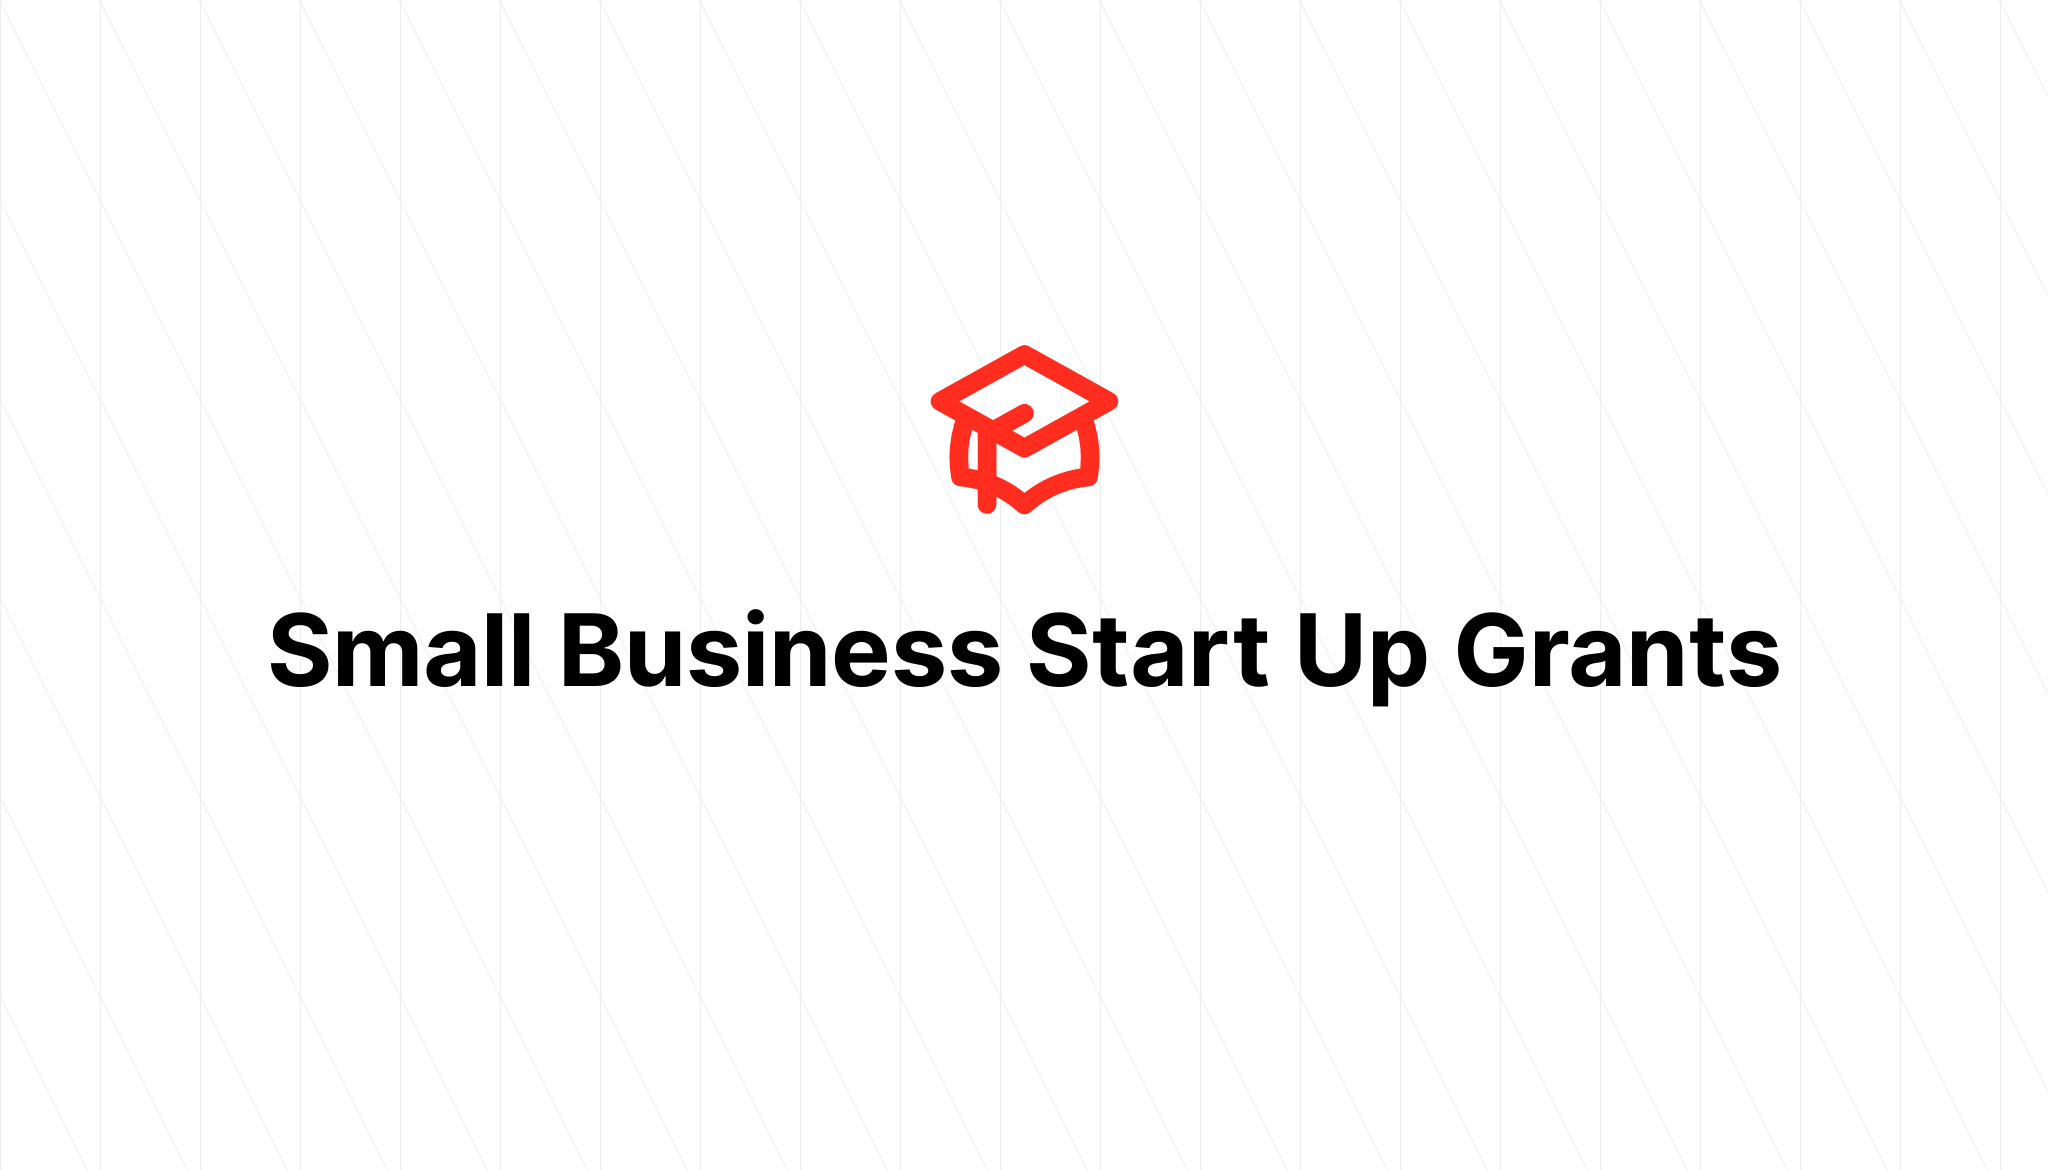 Small Business Start Up Grants Pricify